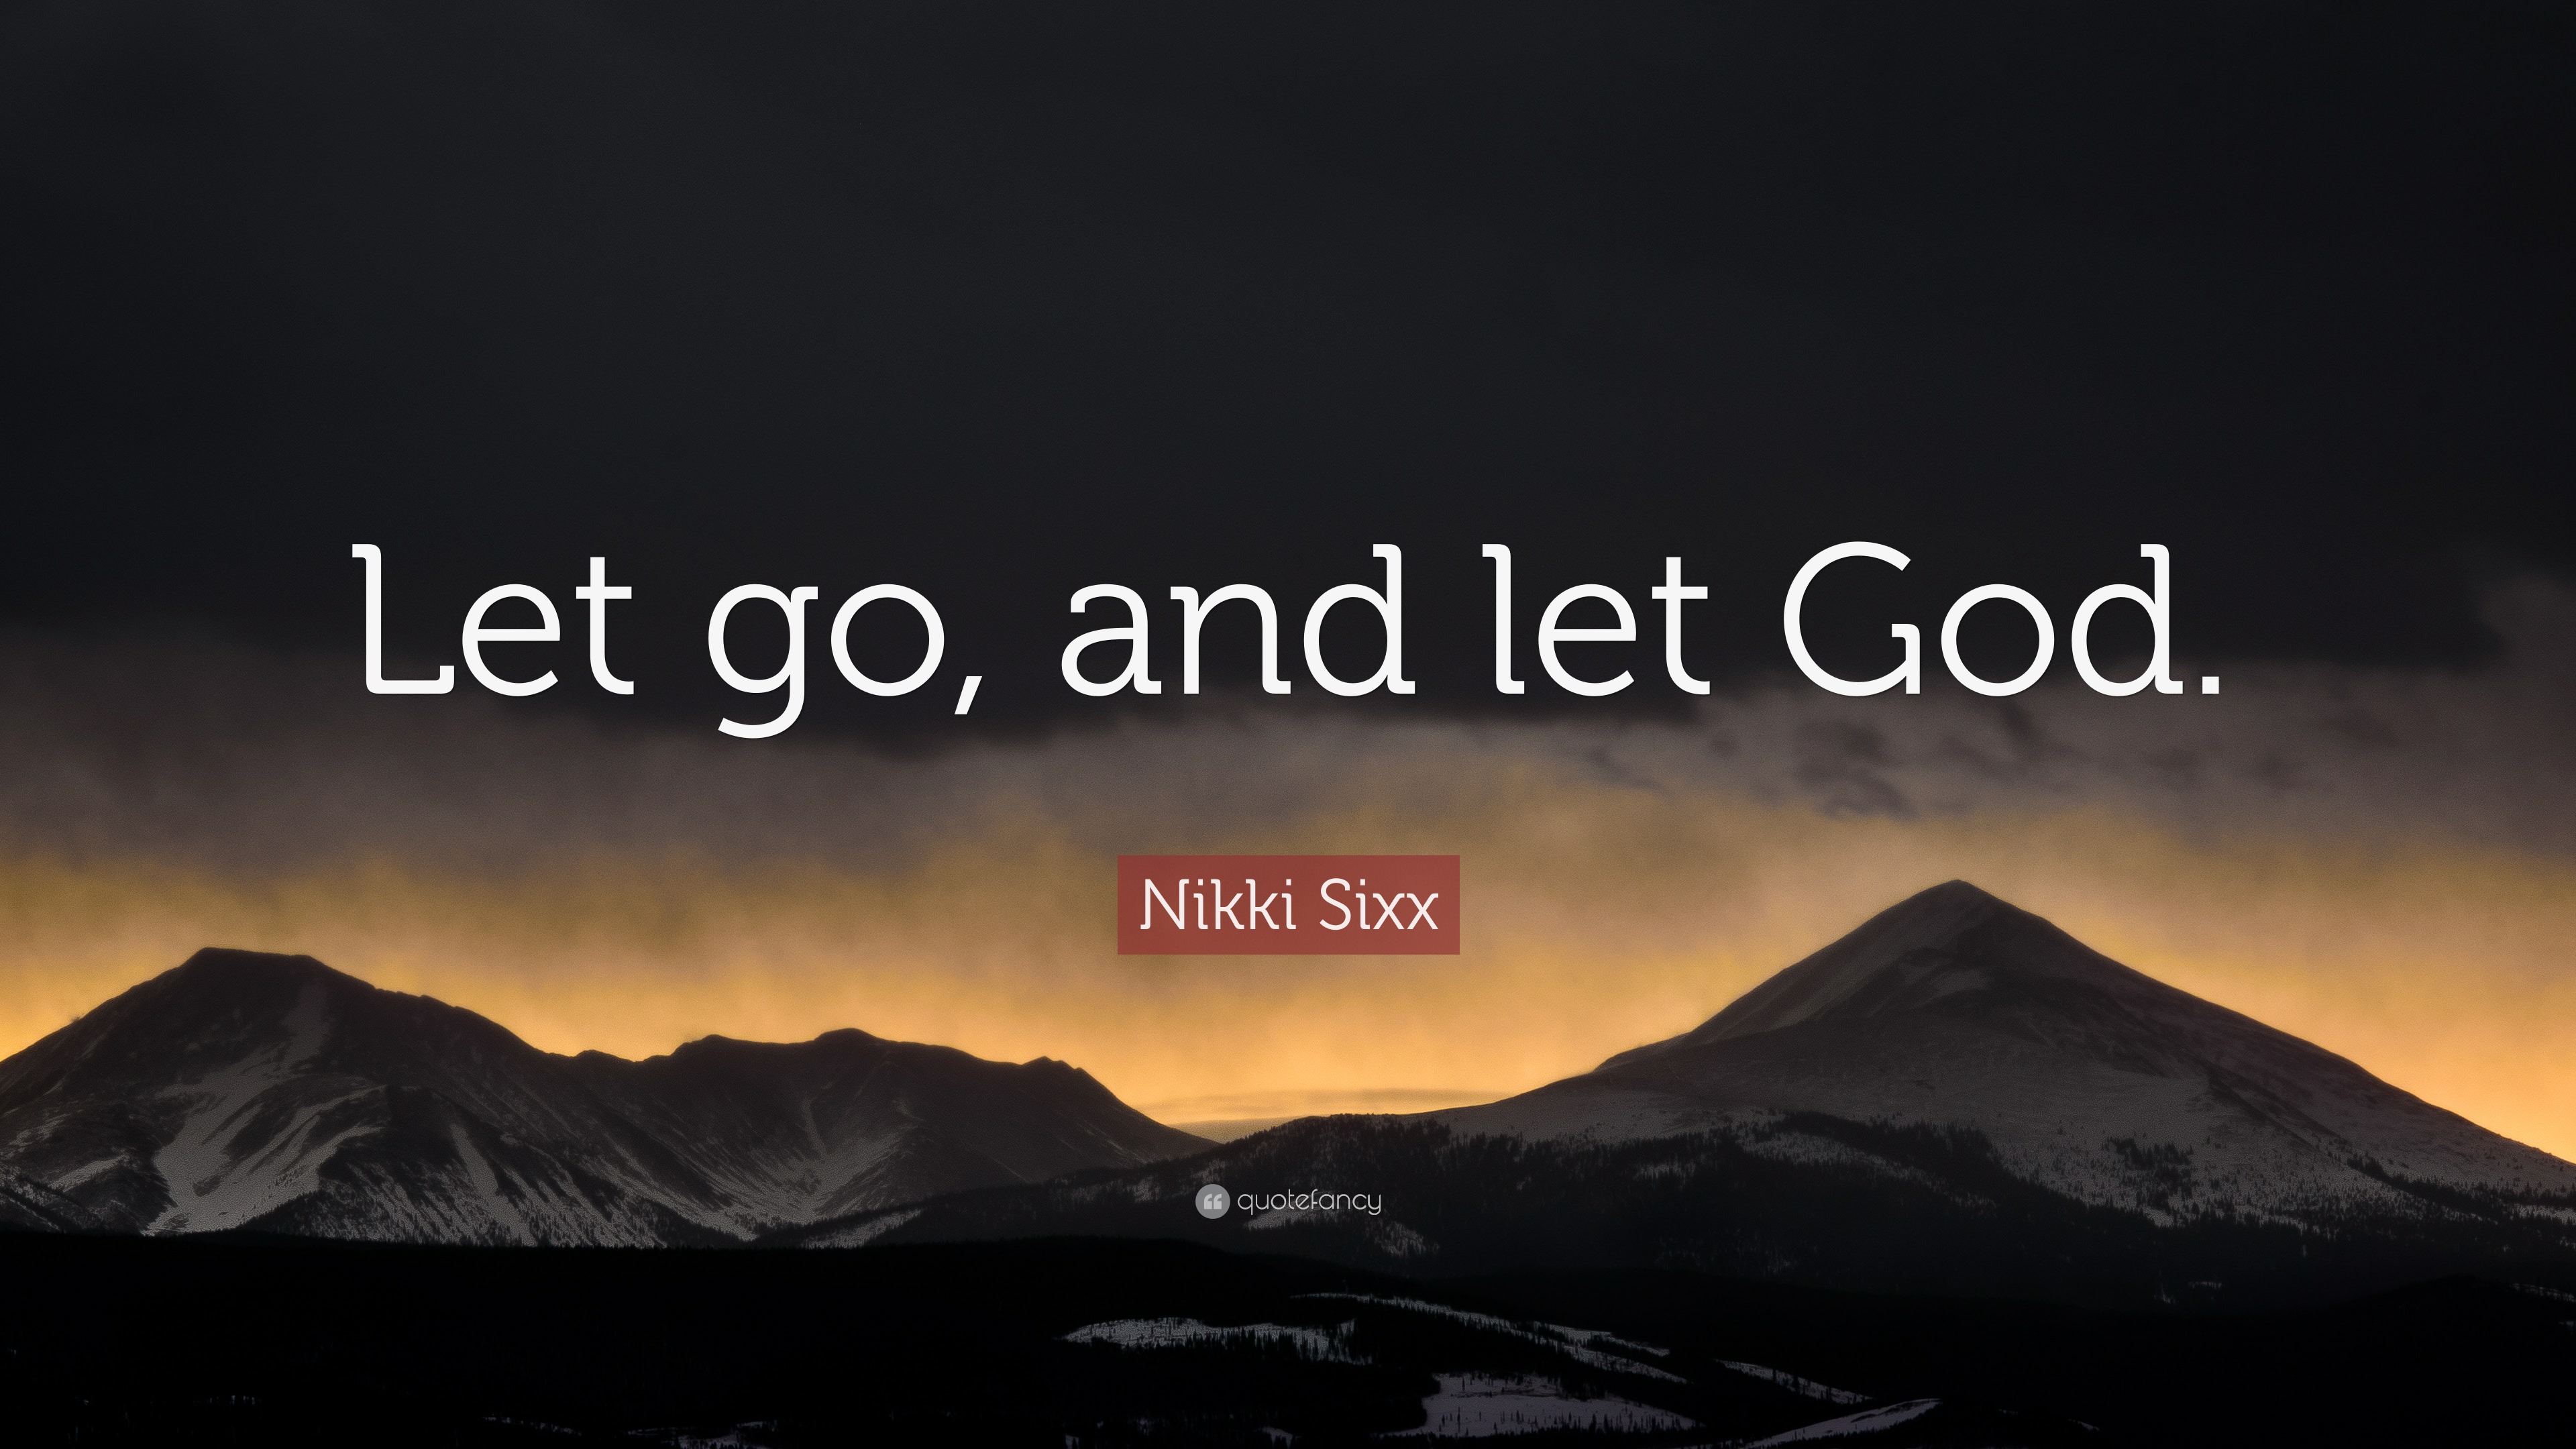 Nikki Sixx Quote Let go and let God